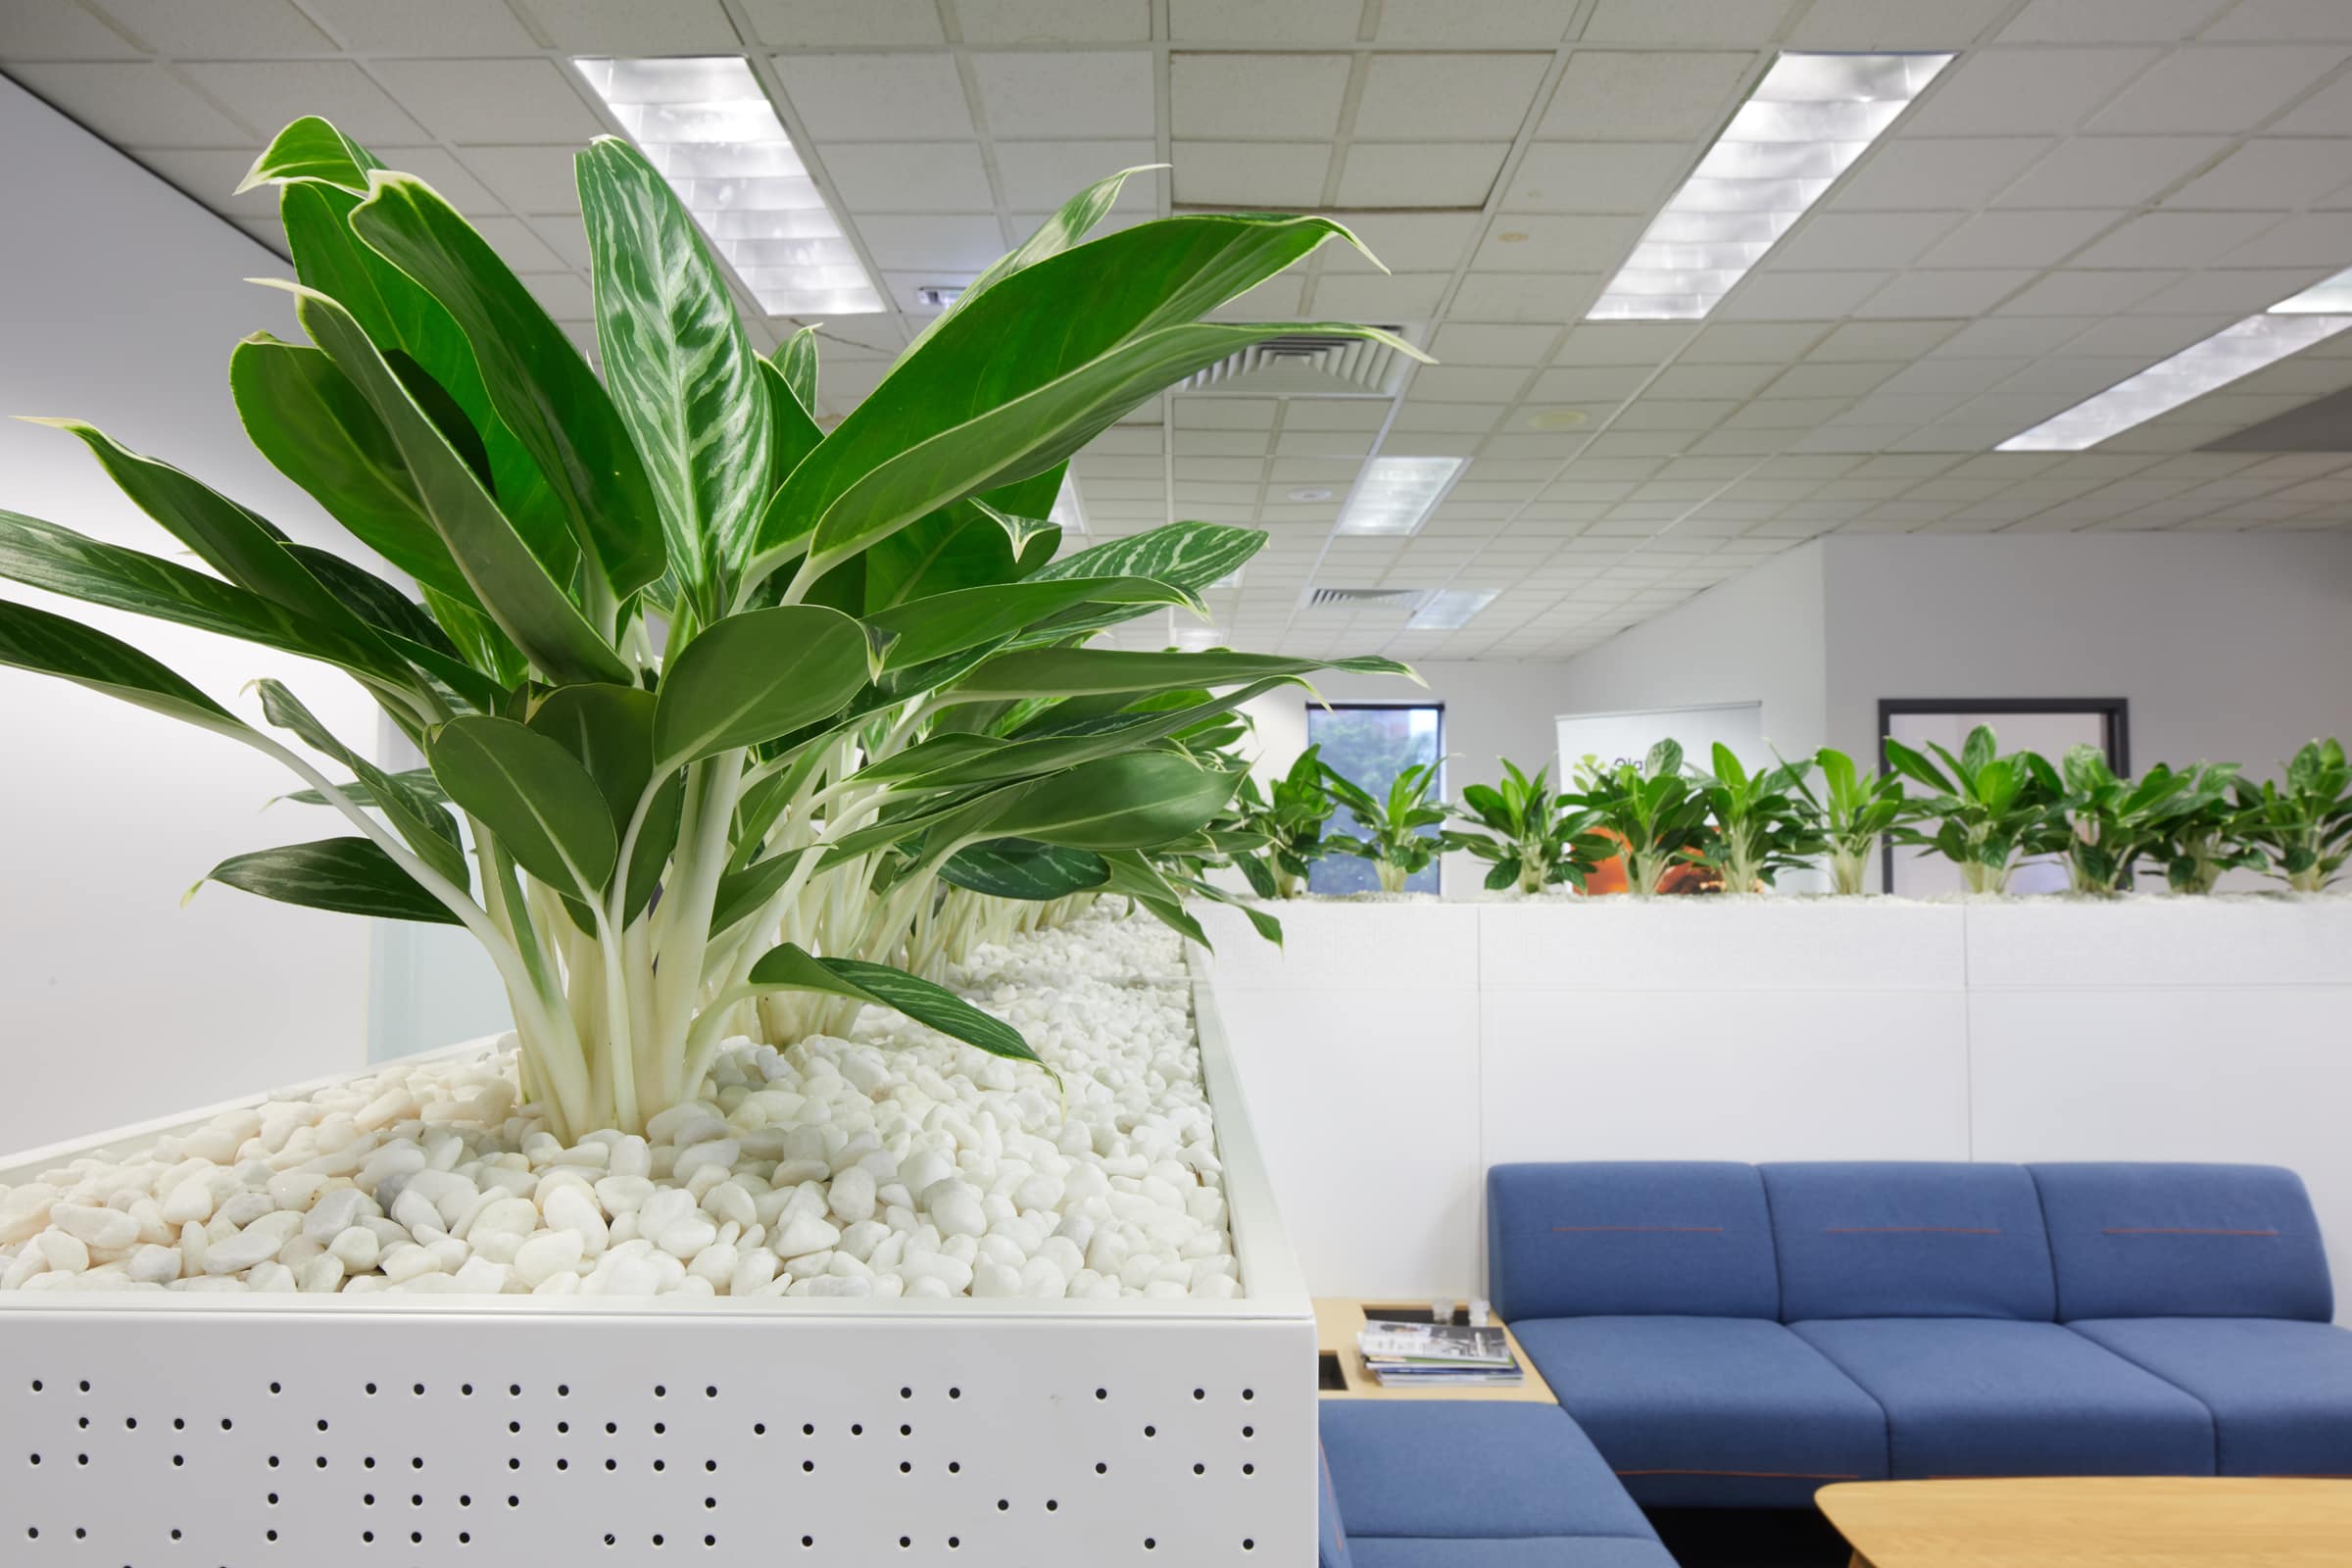 A professional photograph of a corporate office break room with plants in a section divider.